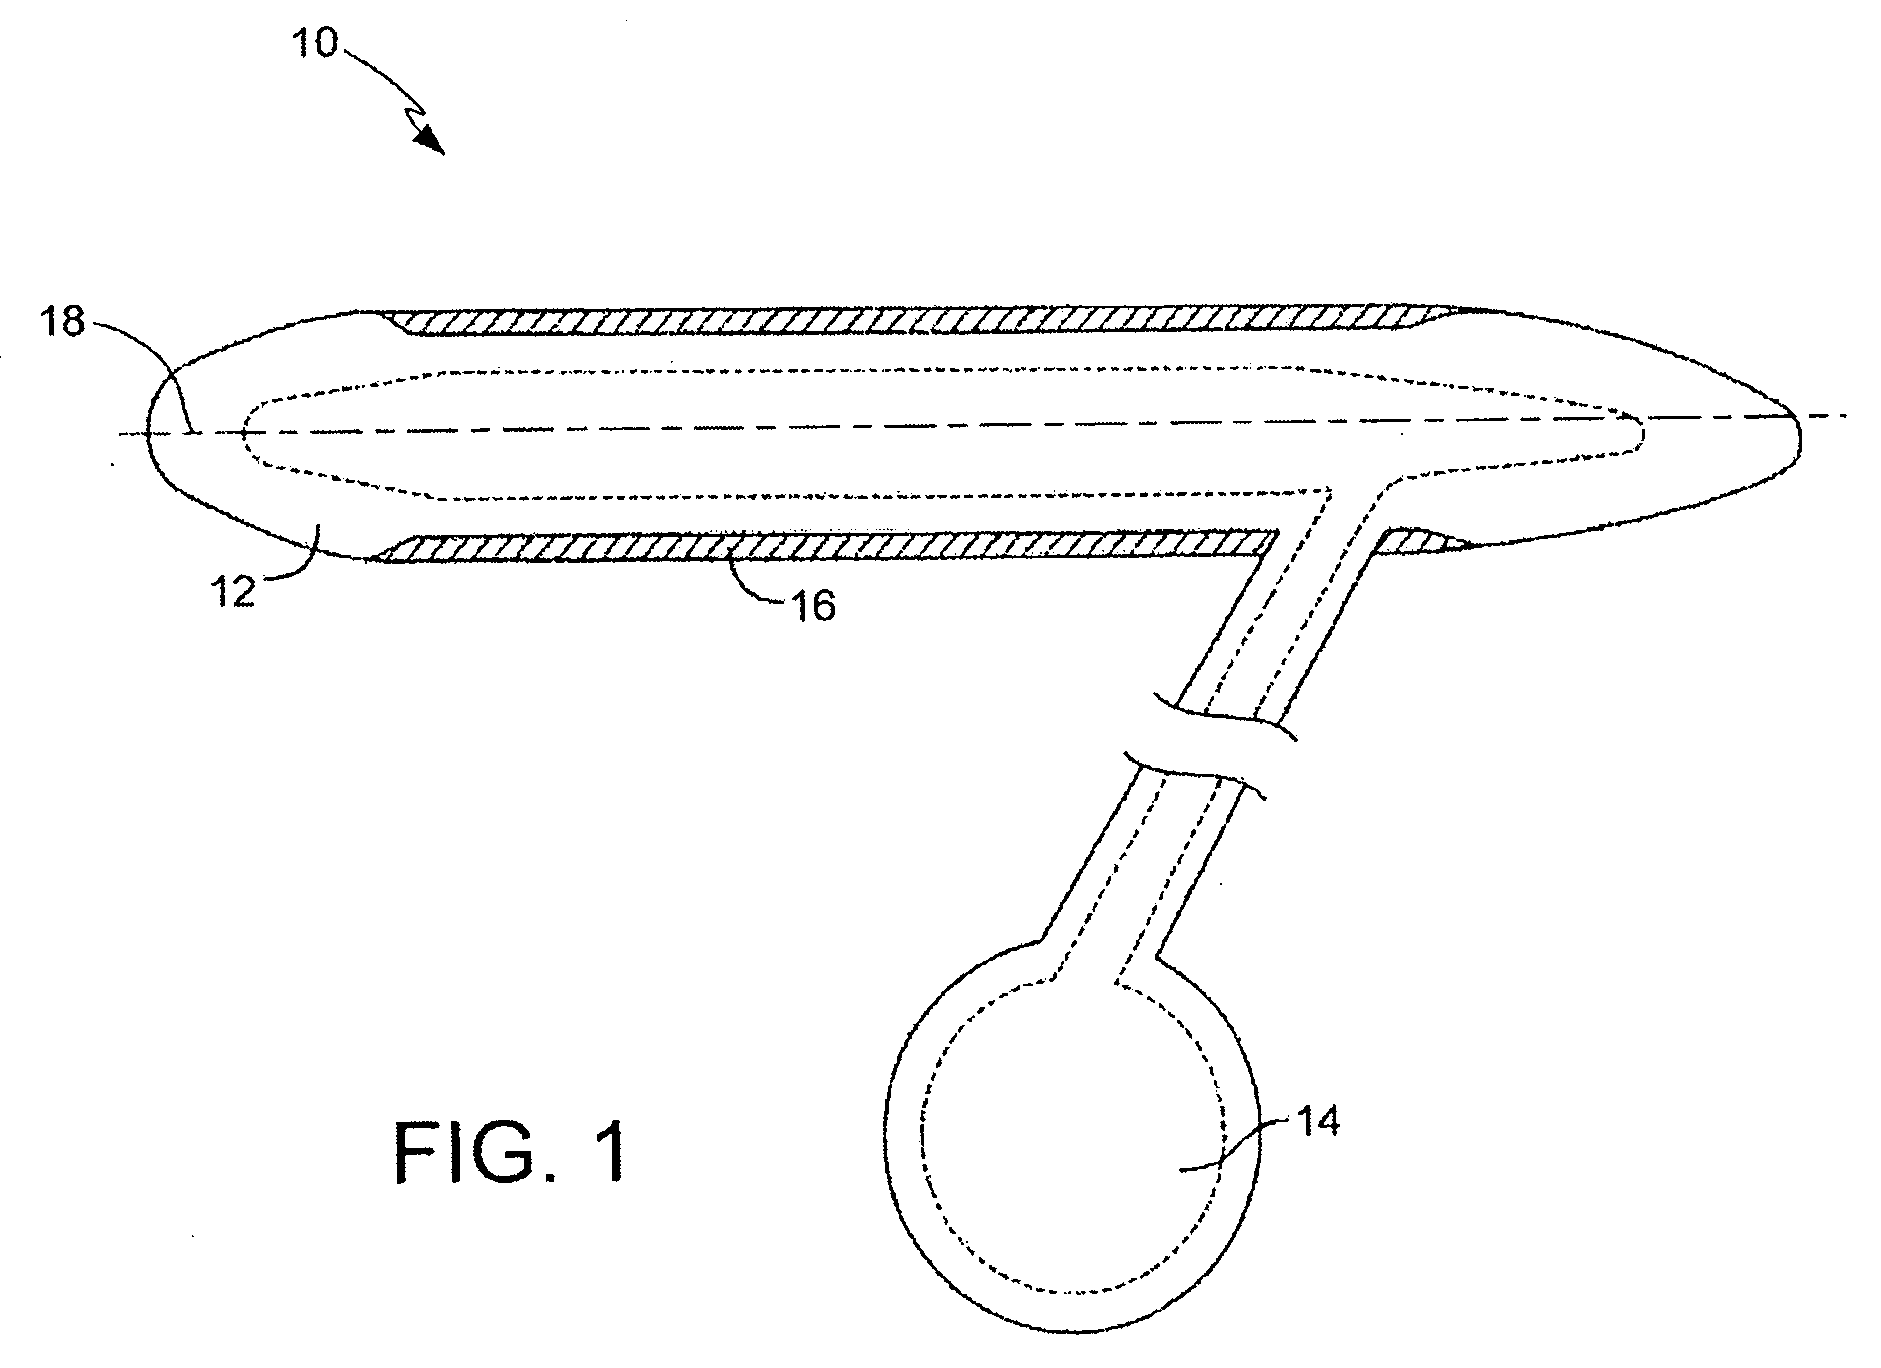 Corrugated Expansion-Constraining Sleeve for an Inflatable Penile Prosthesis Cylinder